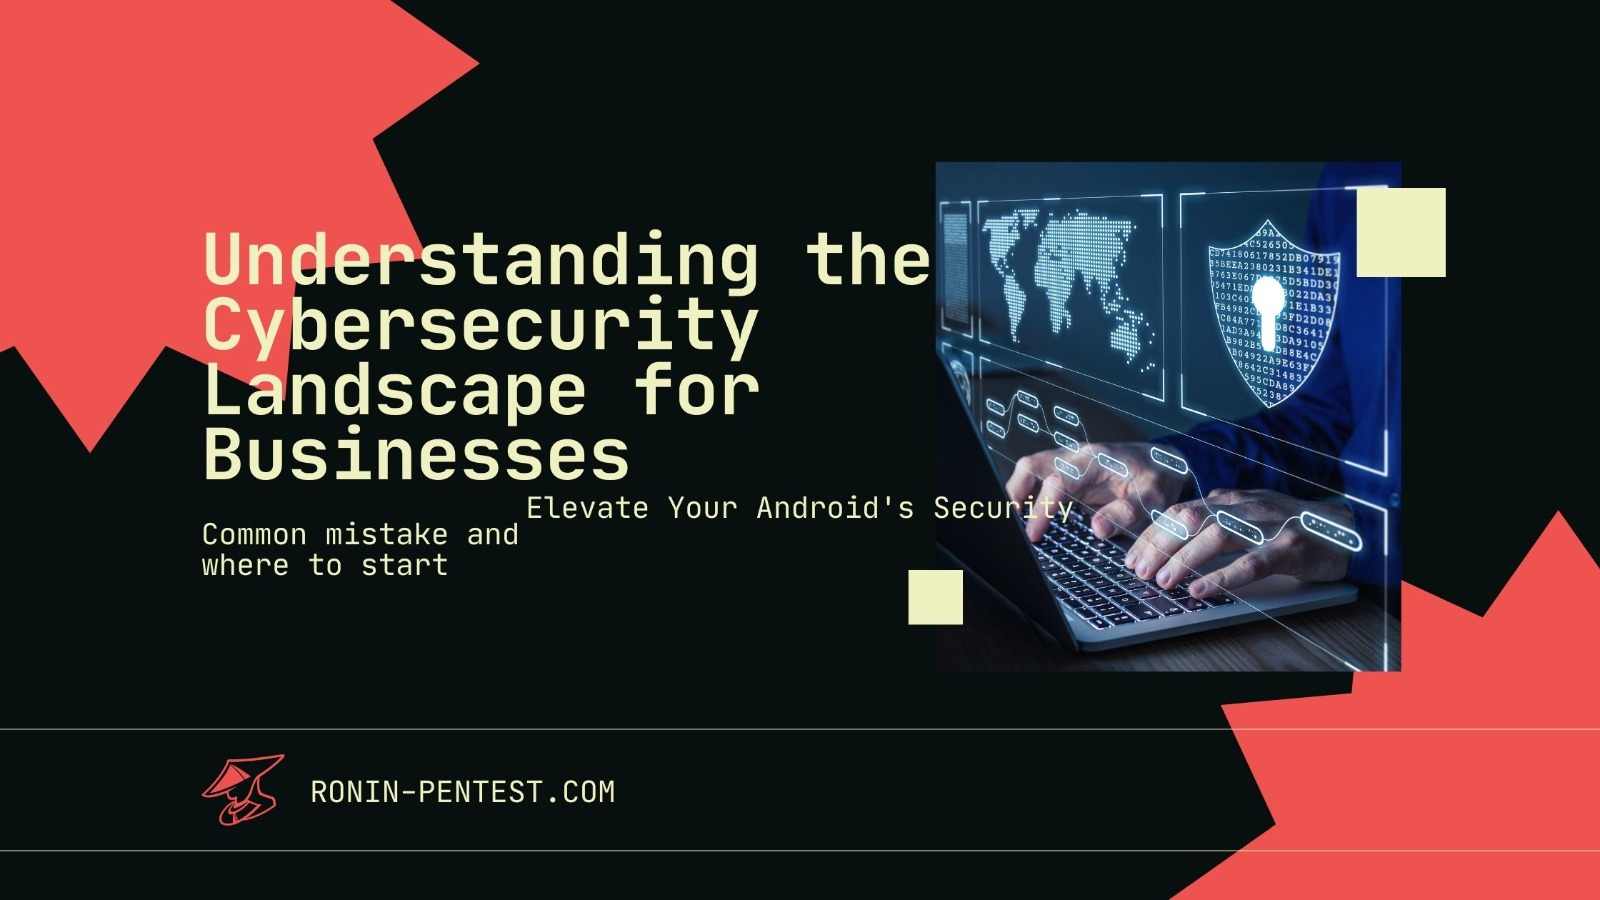 Ronin Pentest | A Comprehensive Cybersecurity Primer for Emerging SMEs: Safeguard Your Business Today